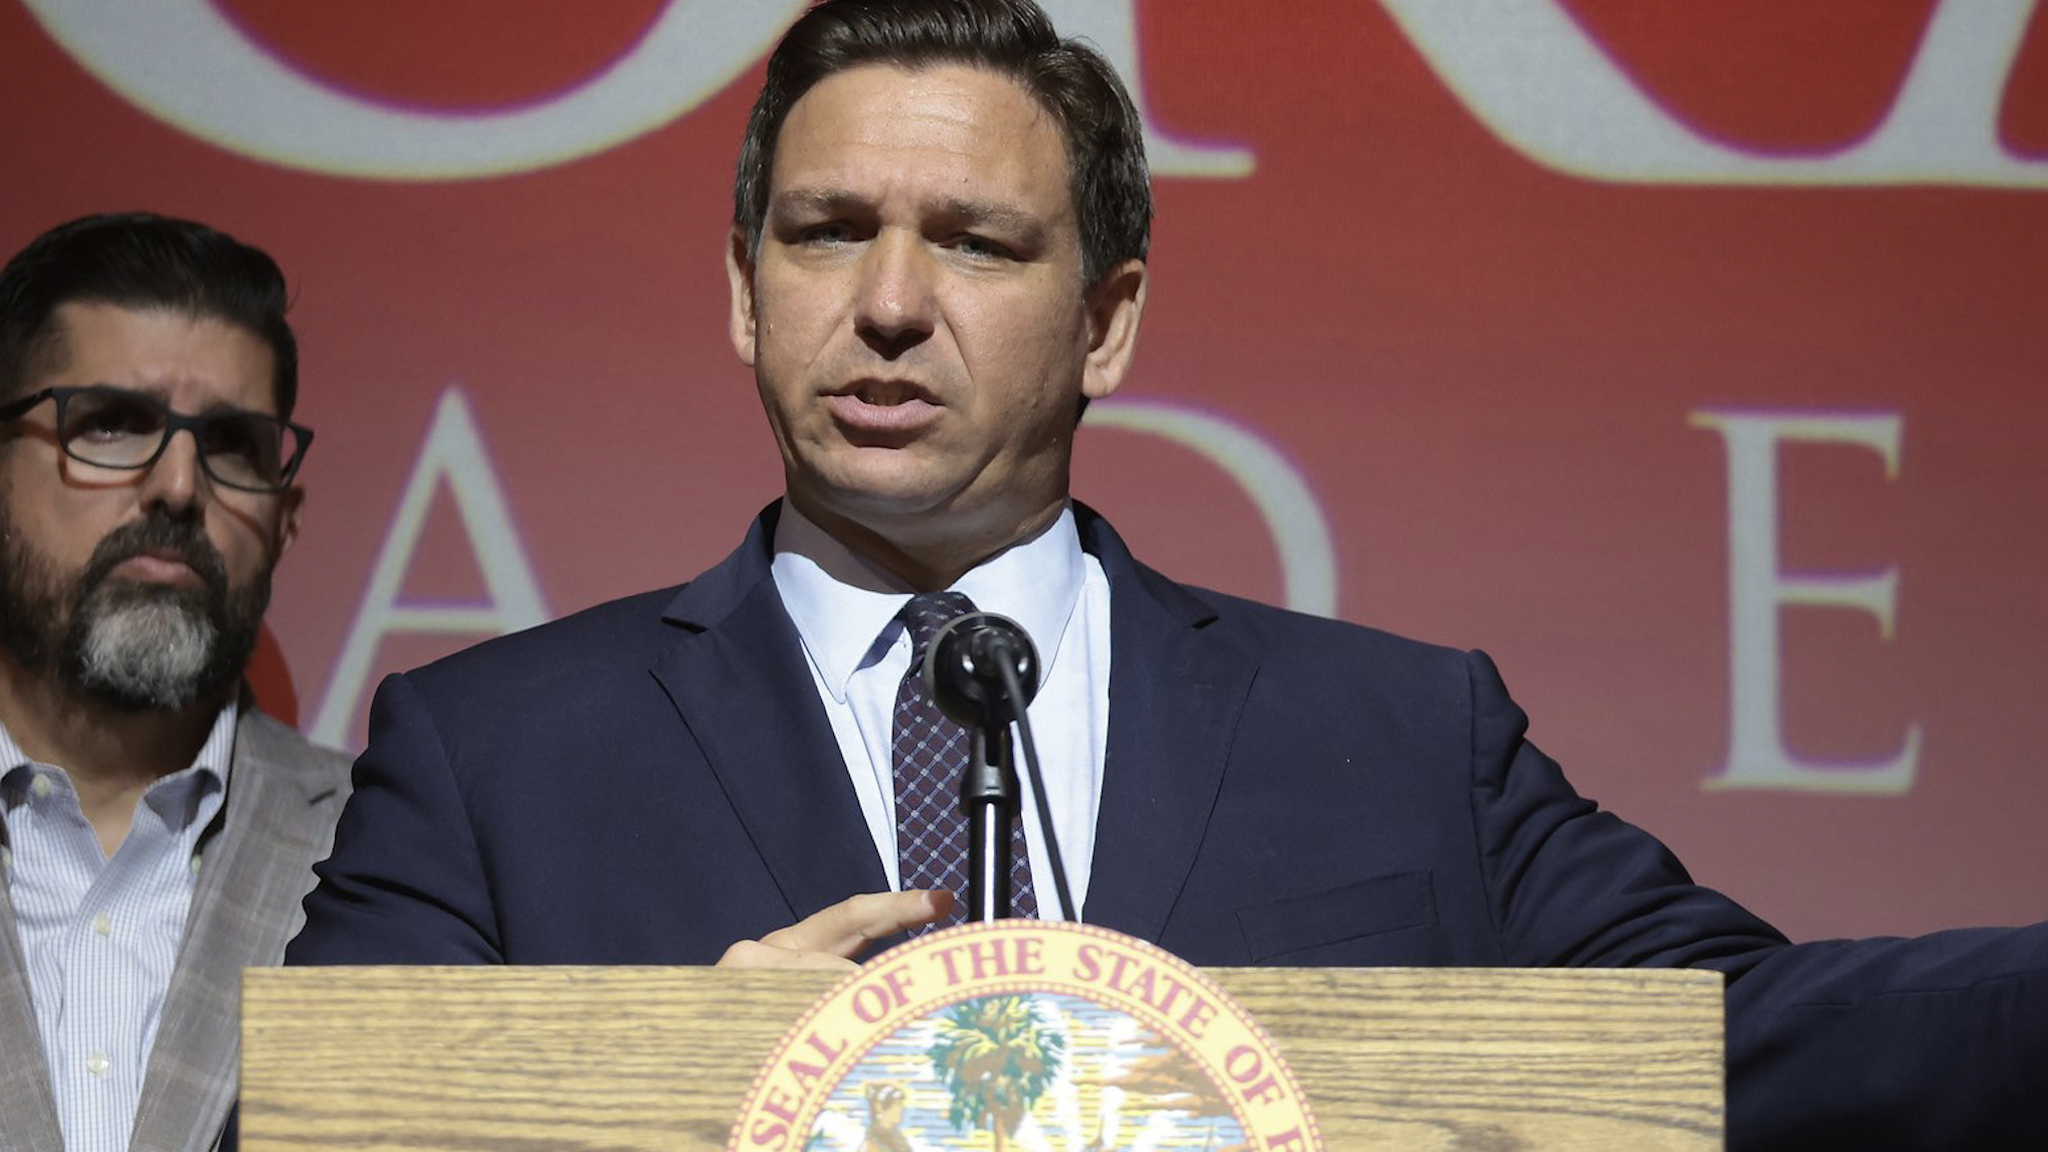 On Tuesday, September 14, 2021, Florida Gov. Ron DeSantis calls on lawmakers to revamp the state&apos;s school accountability system by eliminating several of the annual exams, and replacing them with more regular progress monitoring that already occurs throughout the school year. DeSantis spoke at Doral Academy Prepatory School with members of the Florida legislature, school officials and others at his side.